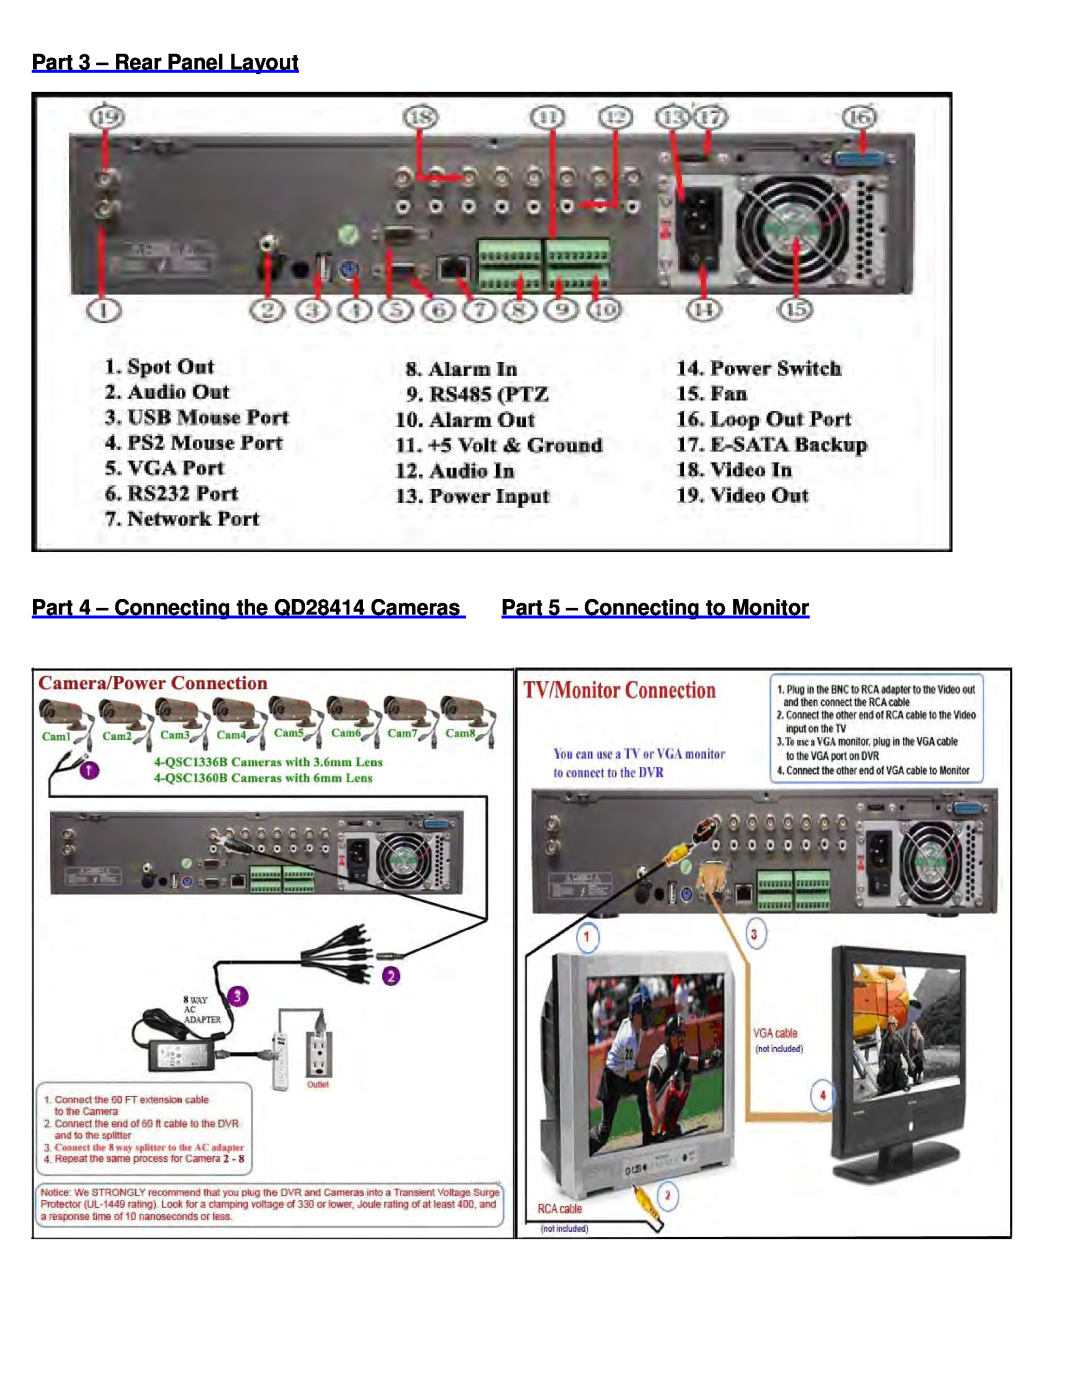 Q-See QT518-814 manual Part 3 - Rear Panel Layout, Part 4 - Connecting the QD28414 Cameras, Part 5 - Connecting to Monitor 